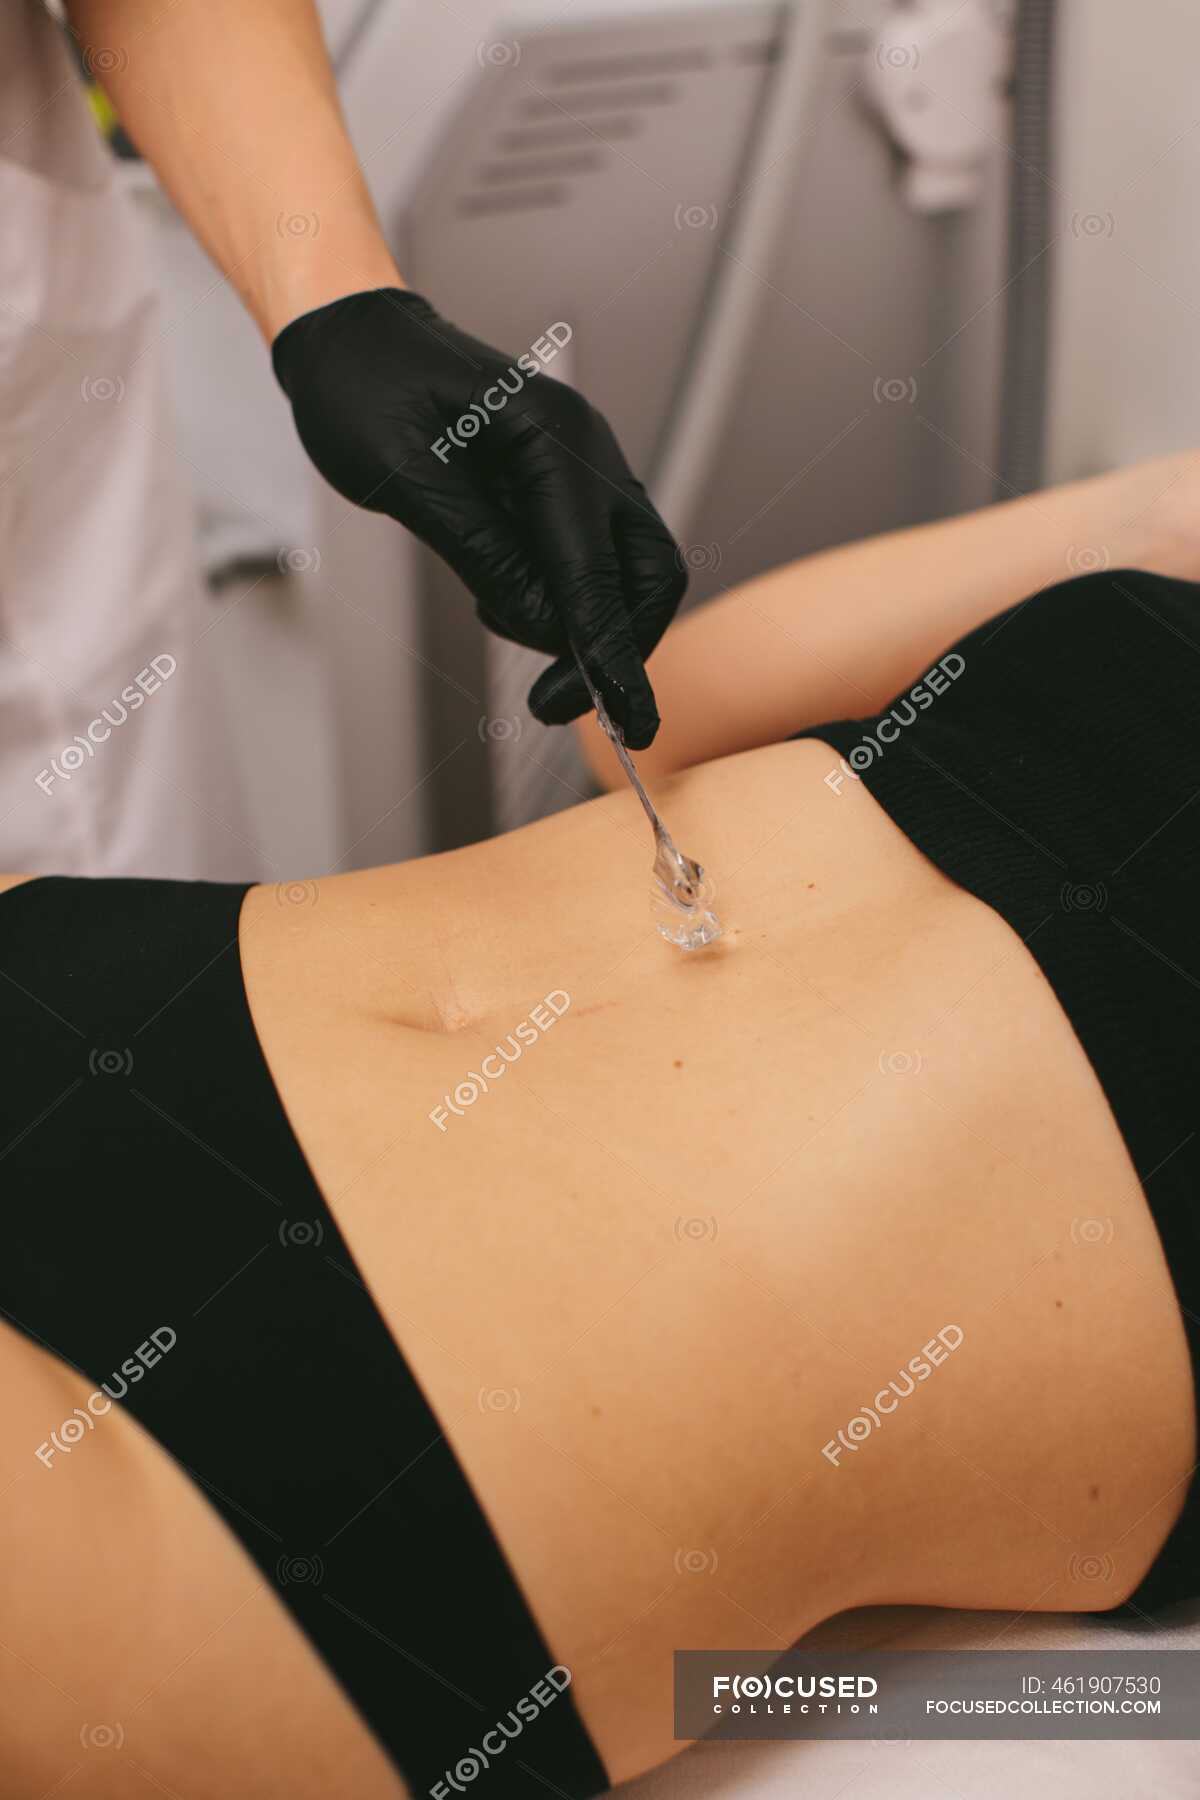 Woman having gel applied for a Laser hair removal treatment in a beauty  salon — beautician, Only Women - Stock Photo | #461907530